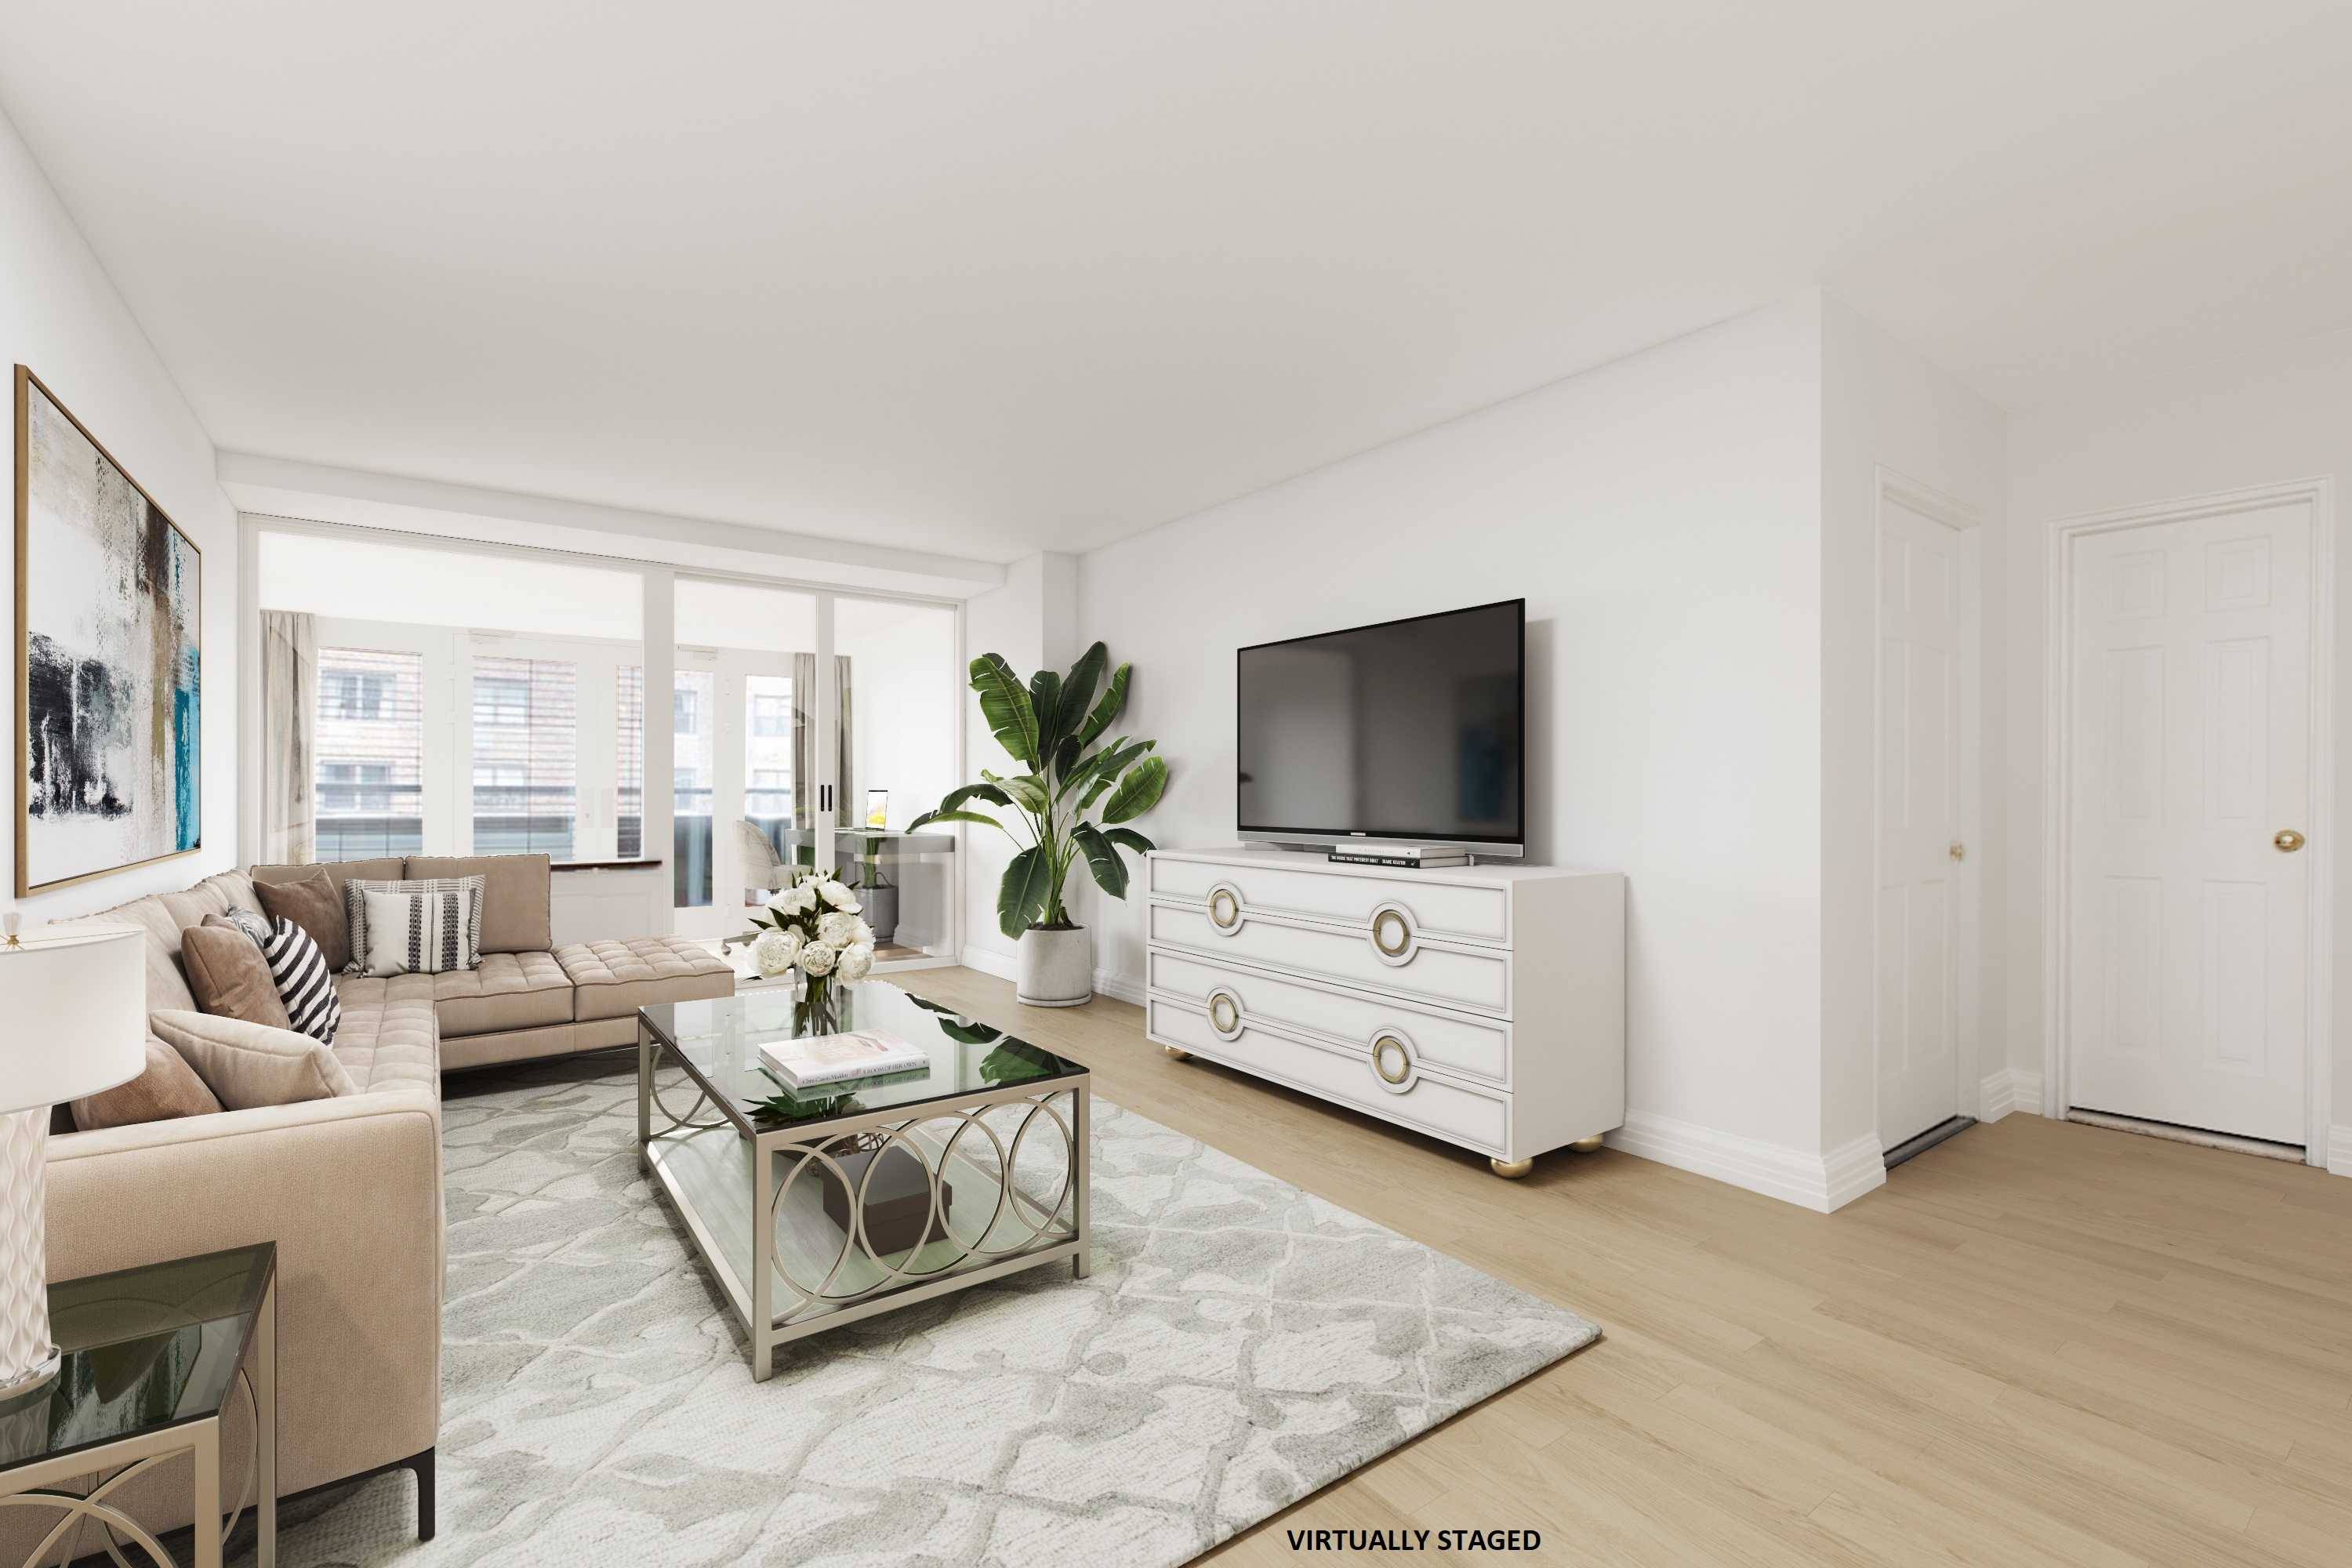 GRAMERCY ONE BEDROOM PLUS BONUS ROOMThis extra large one bedroom with a spacious enclosed terrace bonus room is now available in the heart of Gramercy !